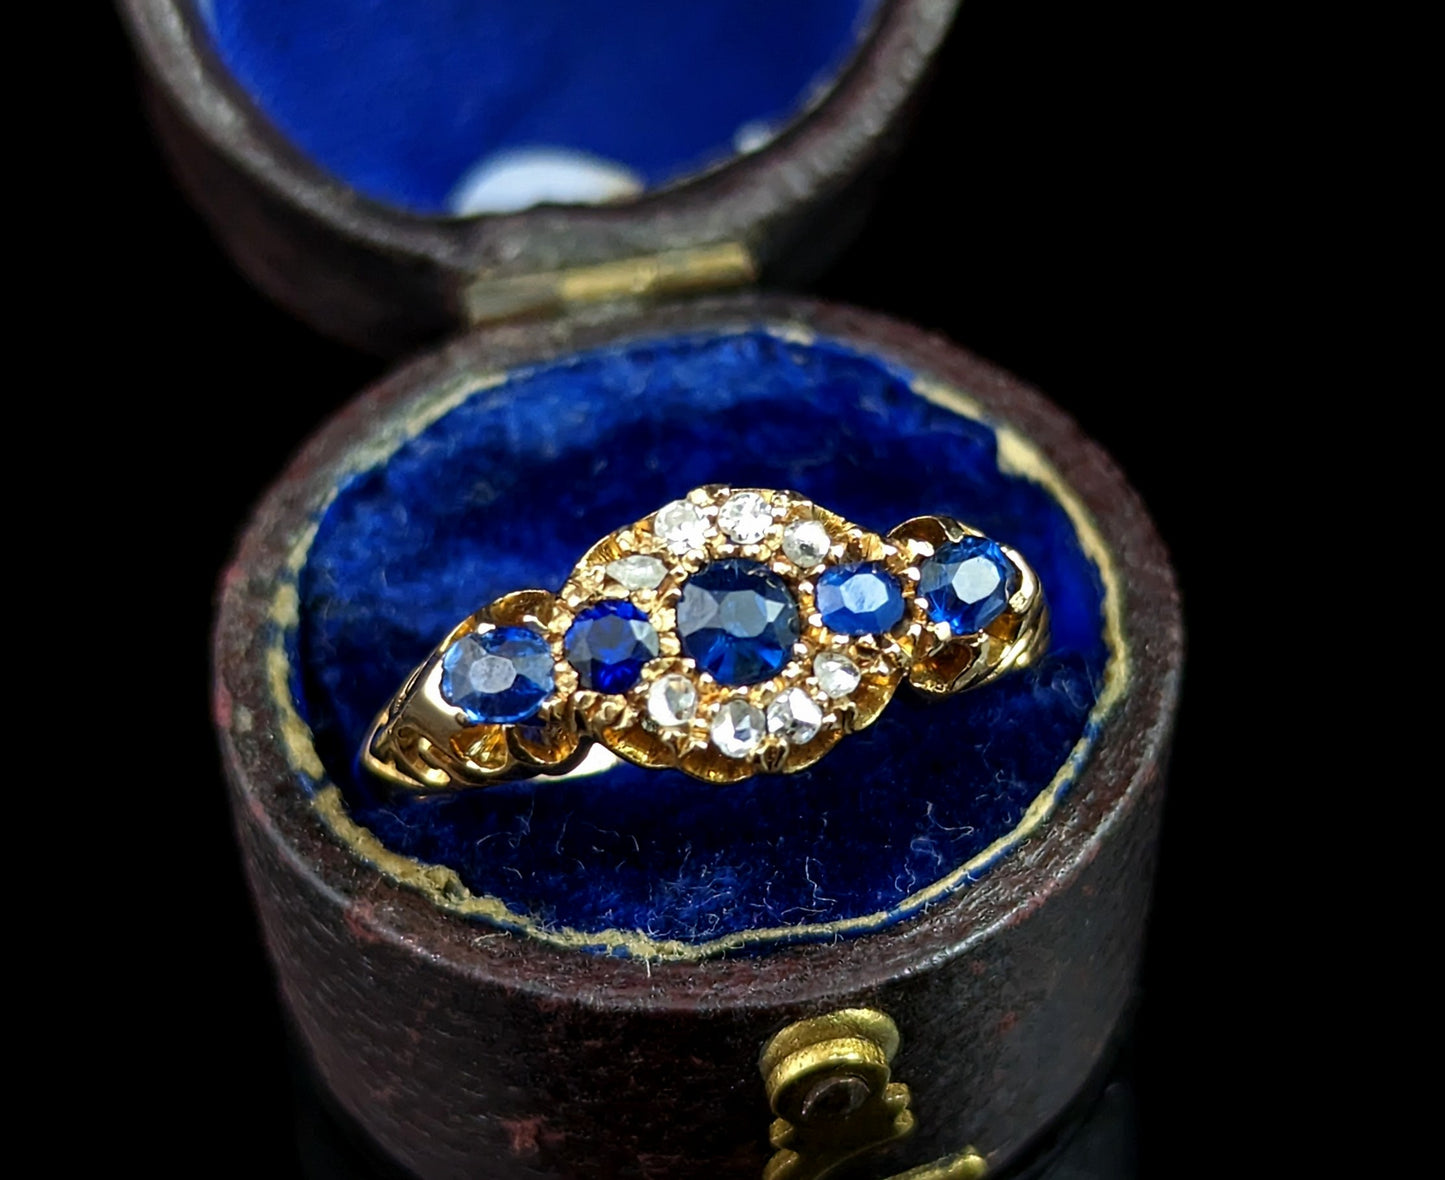 Antique Sapphire and diamond cluster ring, 18ct gold, Edwardian